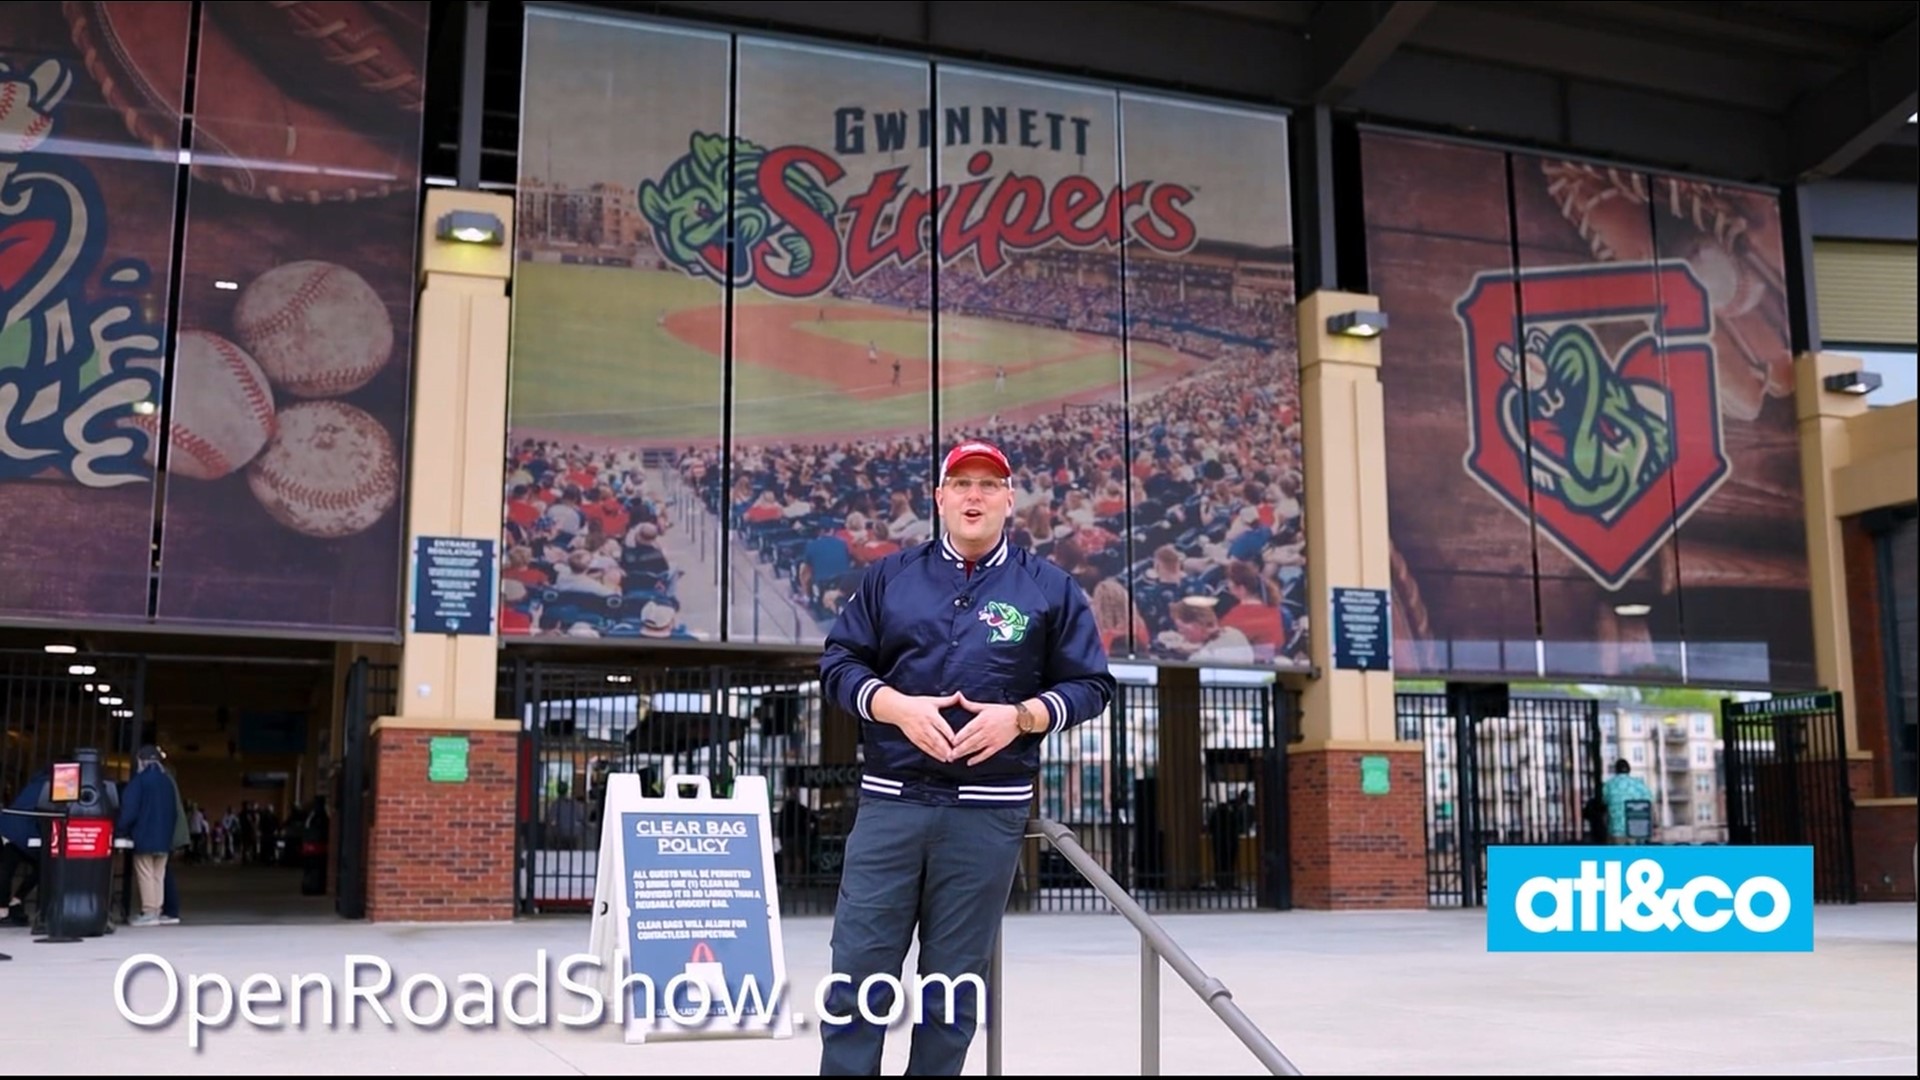 Go Gwinnett Stripers! Ingles Markets takes us up the road to Coolray Field to cheer on our Triple-A team.